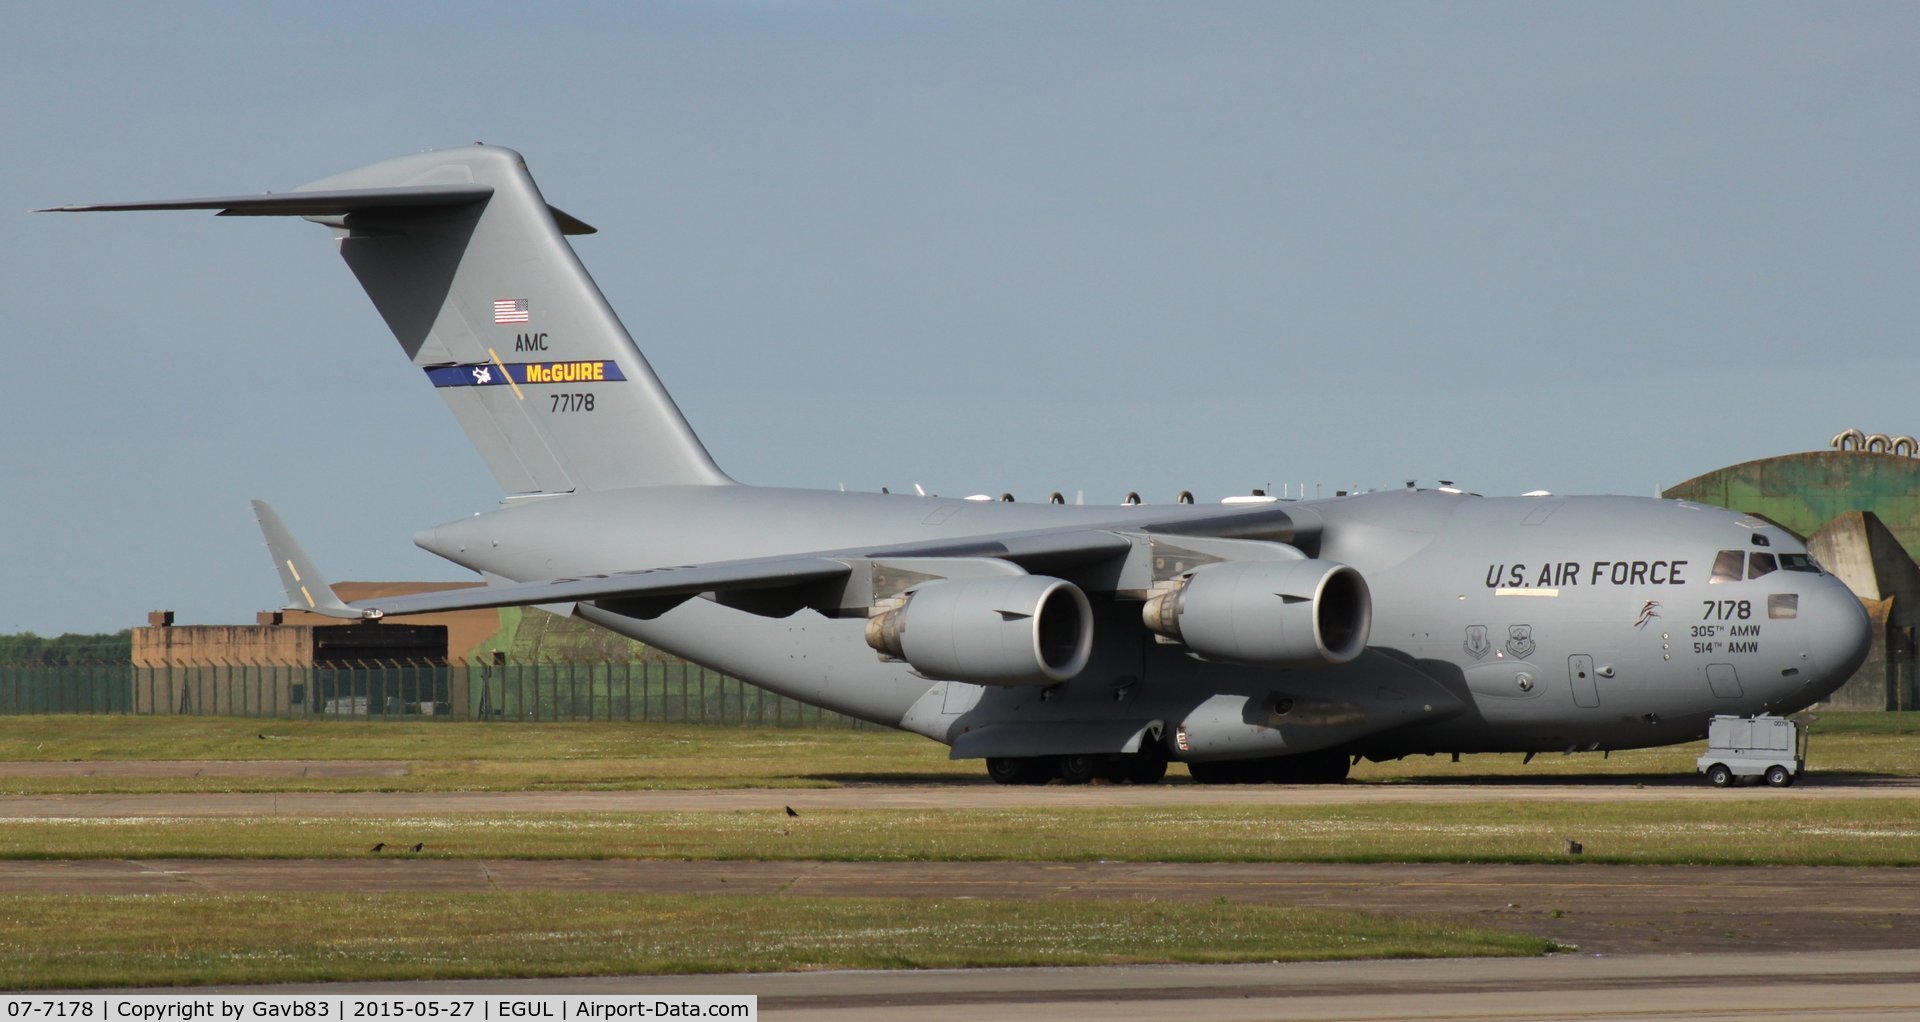 07-7178, 2008 Boeing C-17A Globemaster III C/N F-195, C-17A 07-7181 of the 305th AMW, Maguire AFB, New Jersey.